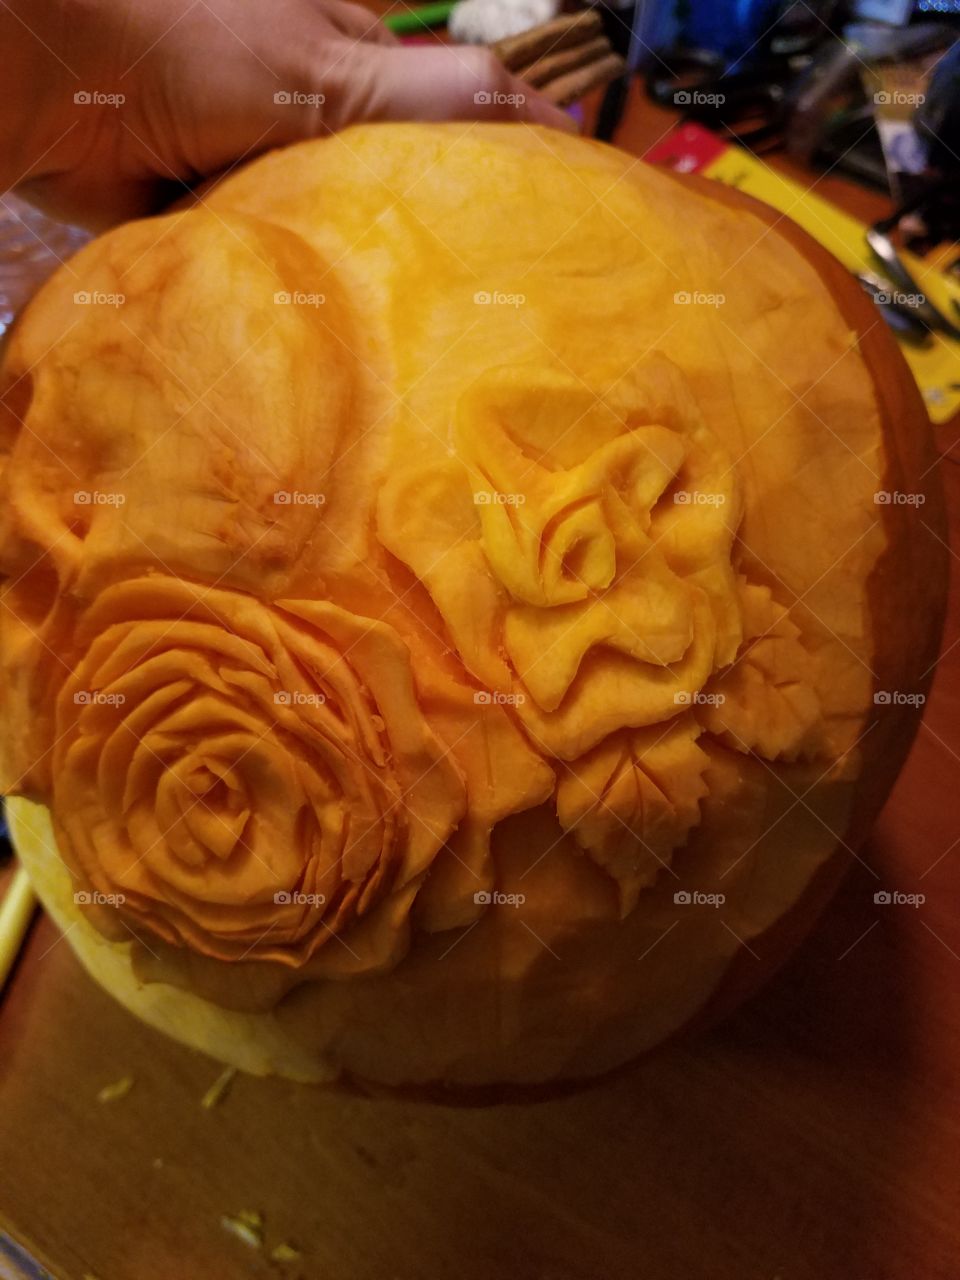 During the carving process of the roses...